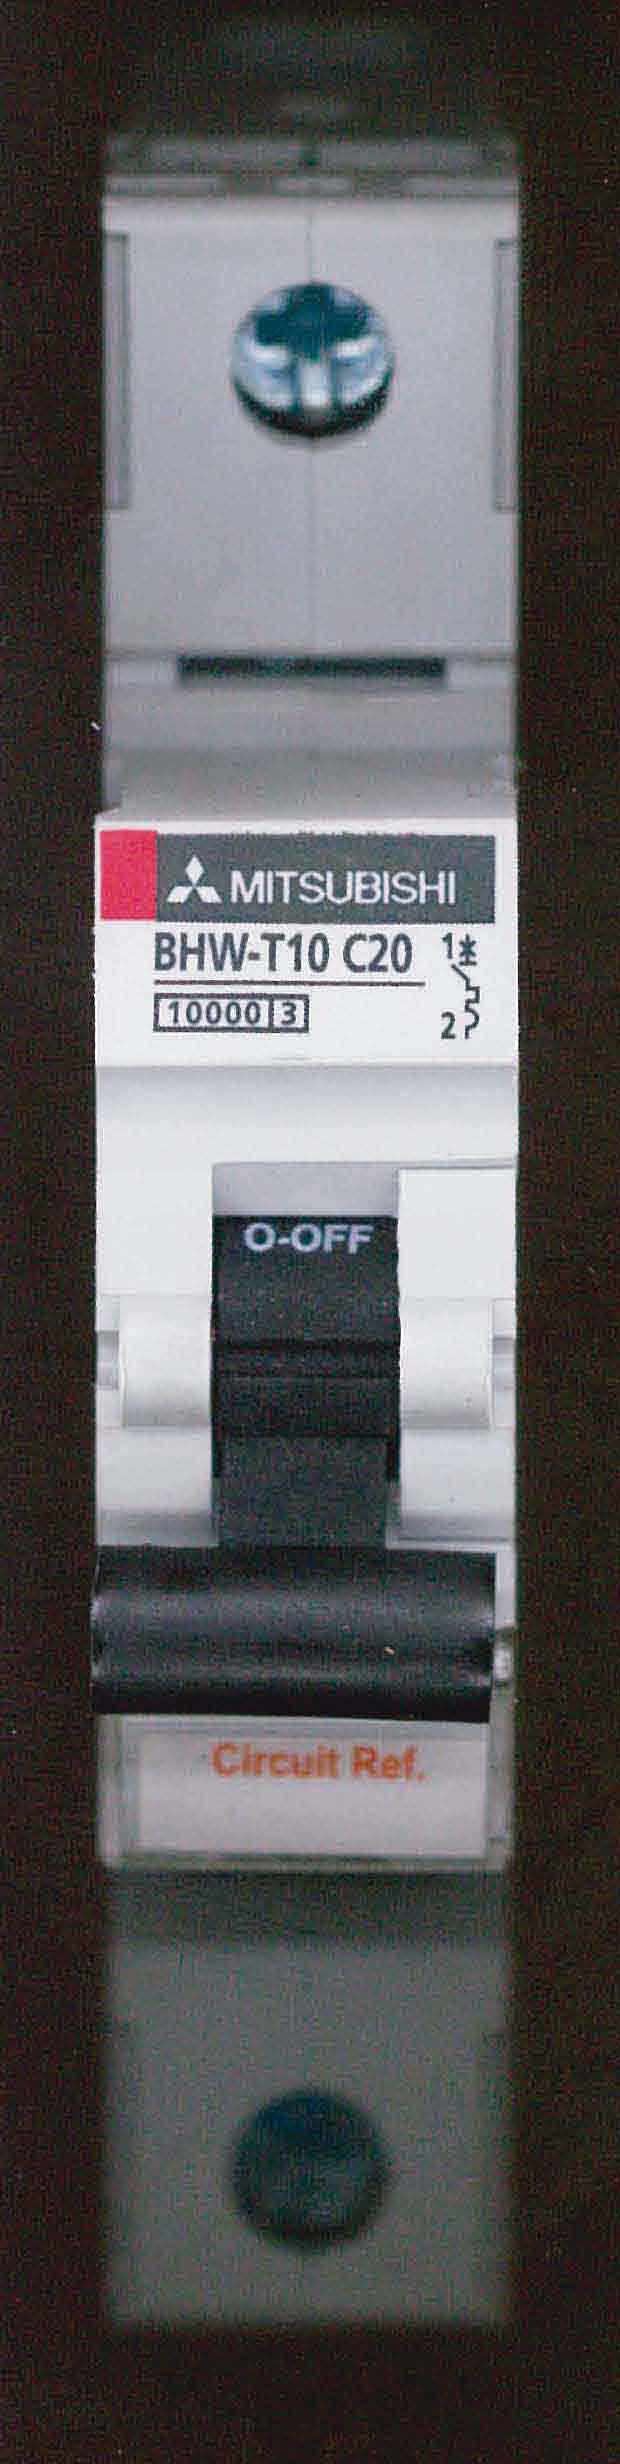 Isolation MCB guarantees complete electric isolation of the downstream circuit when switched off ; thus enhancing safety